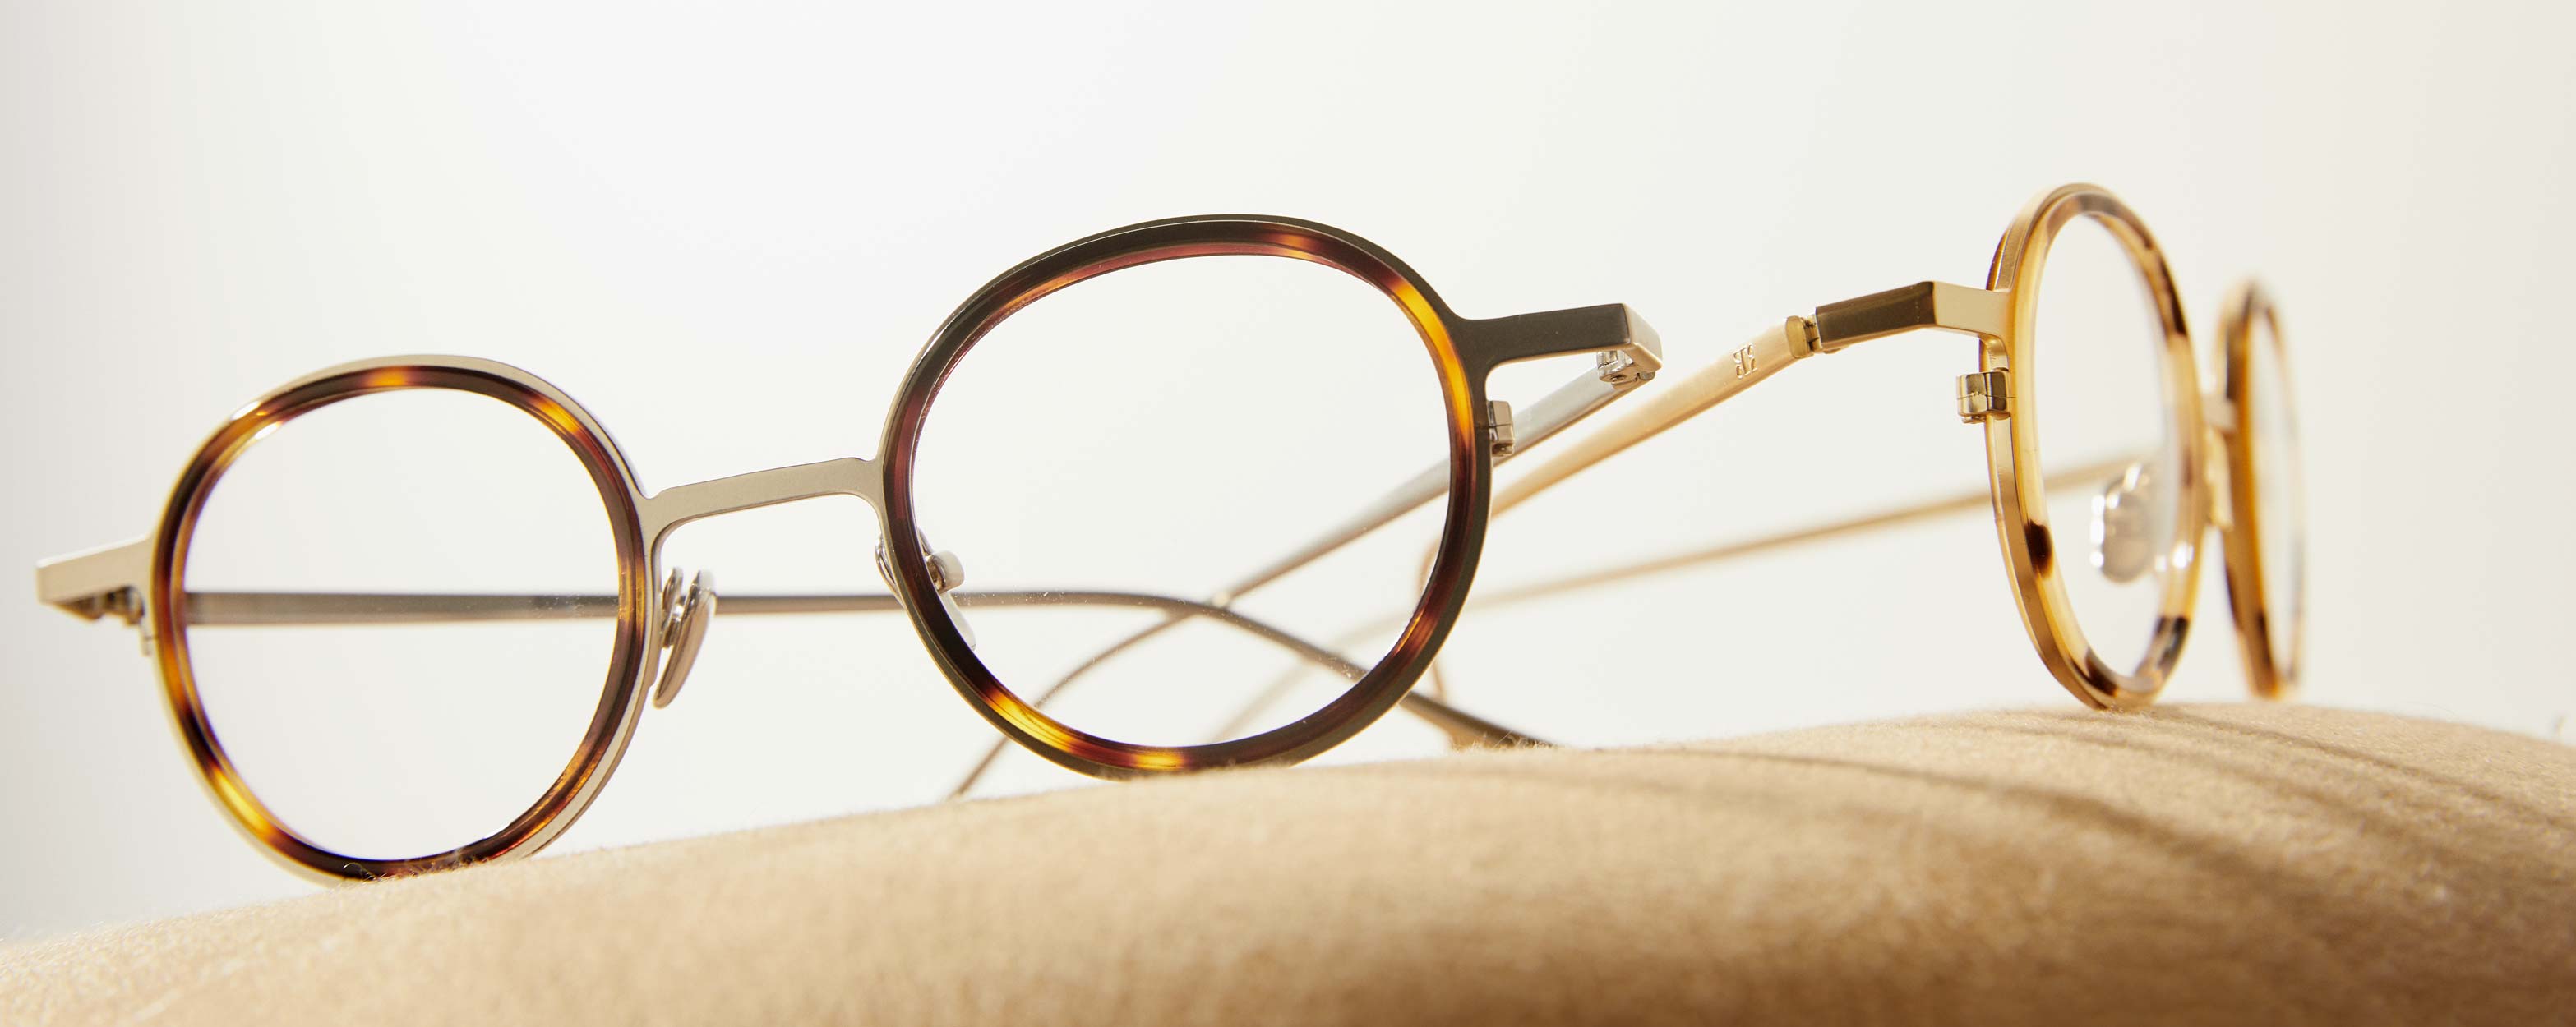 Photo Details of Arthur Tortoise & Mat Silver Reading Glasses in a room